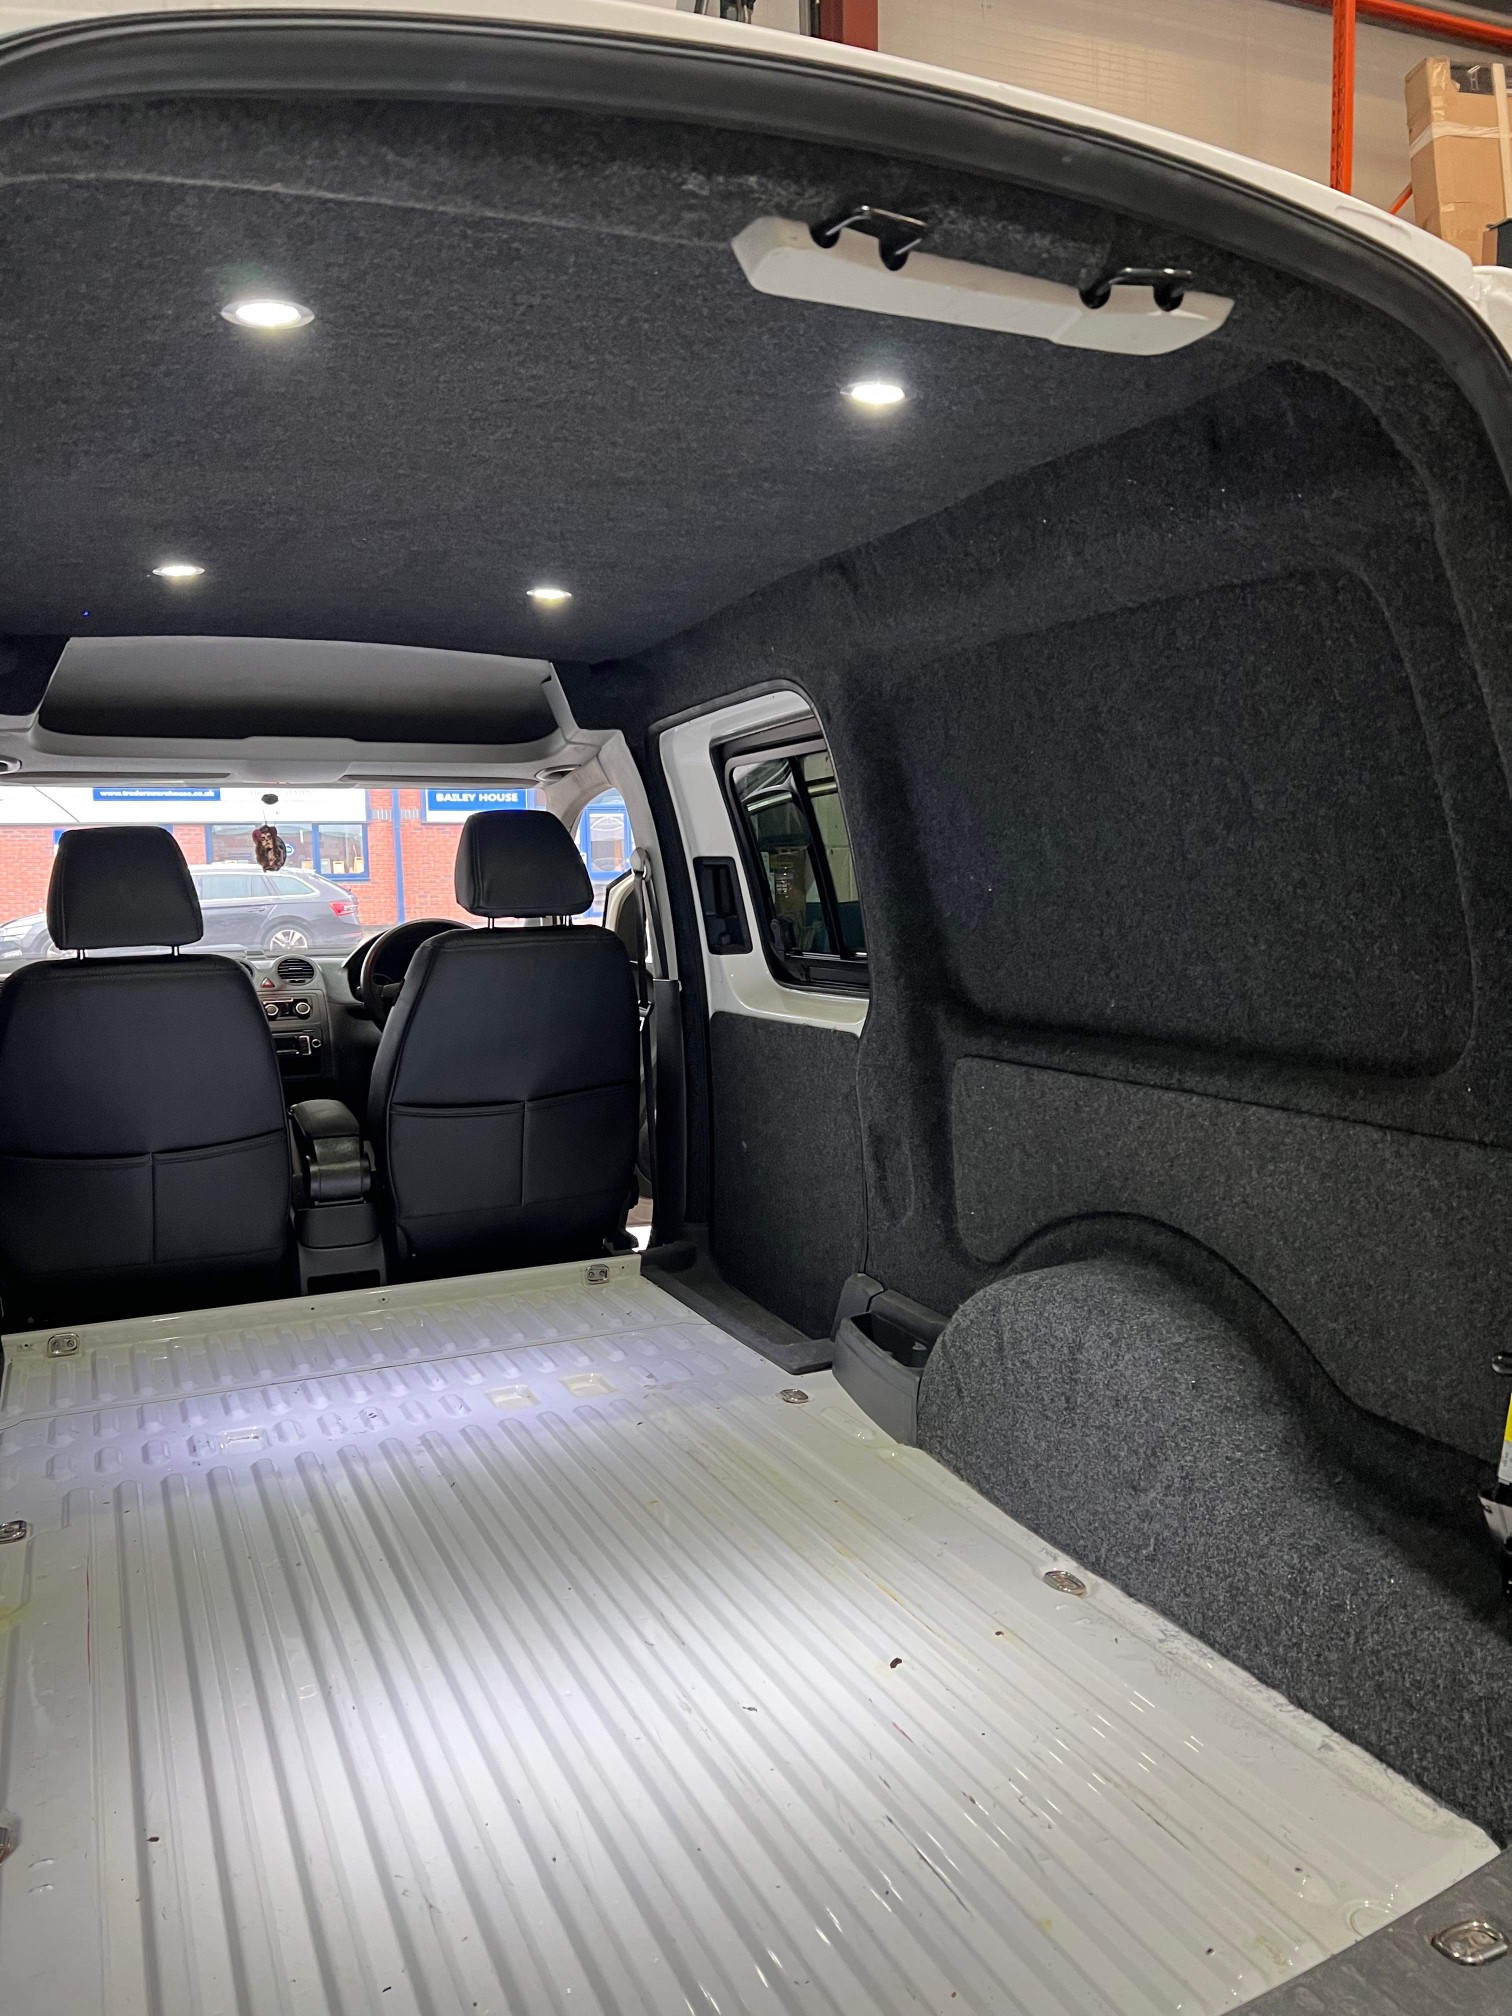 VW Caddy, Windows, insulation, carpet, lights, floor and Altro flooring, fit (1)